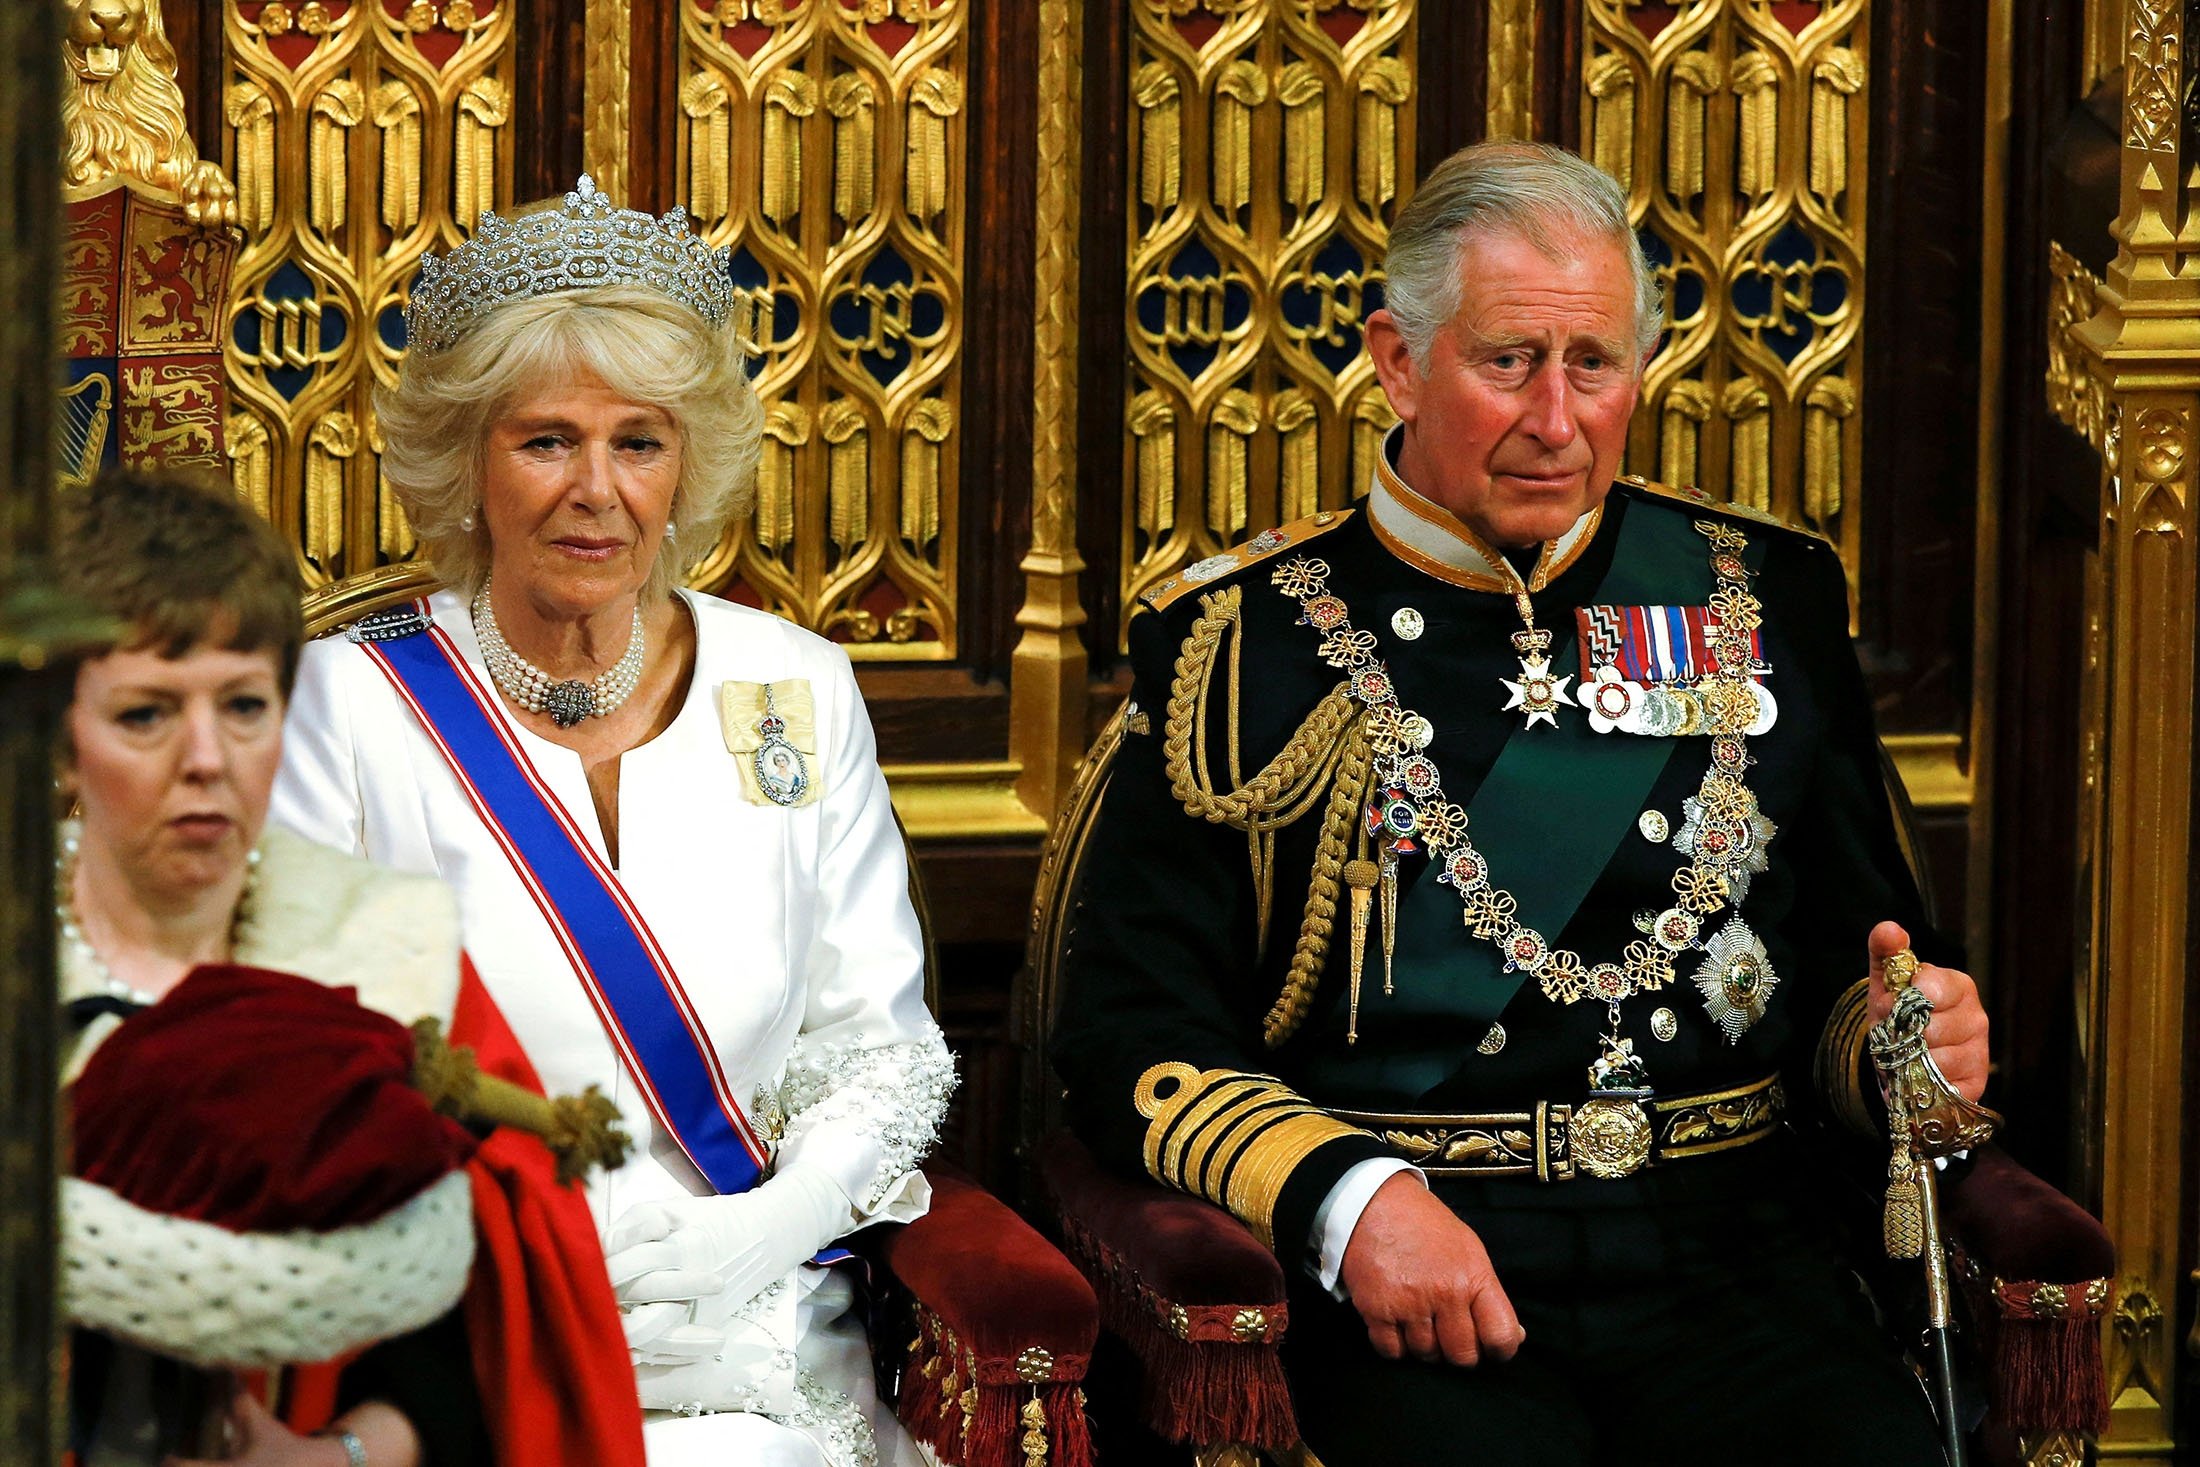 Prince Charles (R) and his wife Camilla, Duchess of Cornwall, wait for Queen Elizabeth to deliver her speech in the House of Lords, during the State Opening of Parliament in the Palace of Westminster in London, U.K., May 27, 2015. (Reuters Photo)